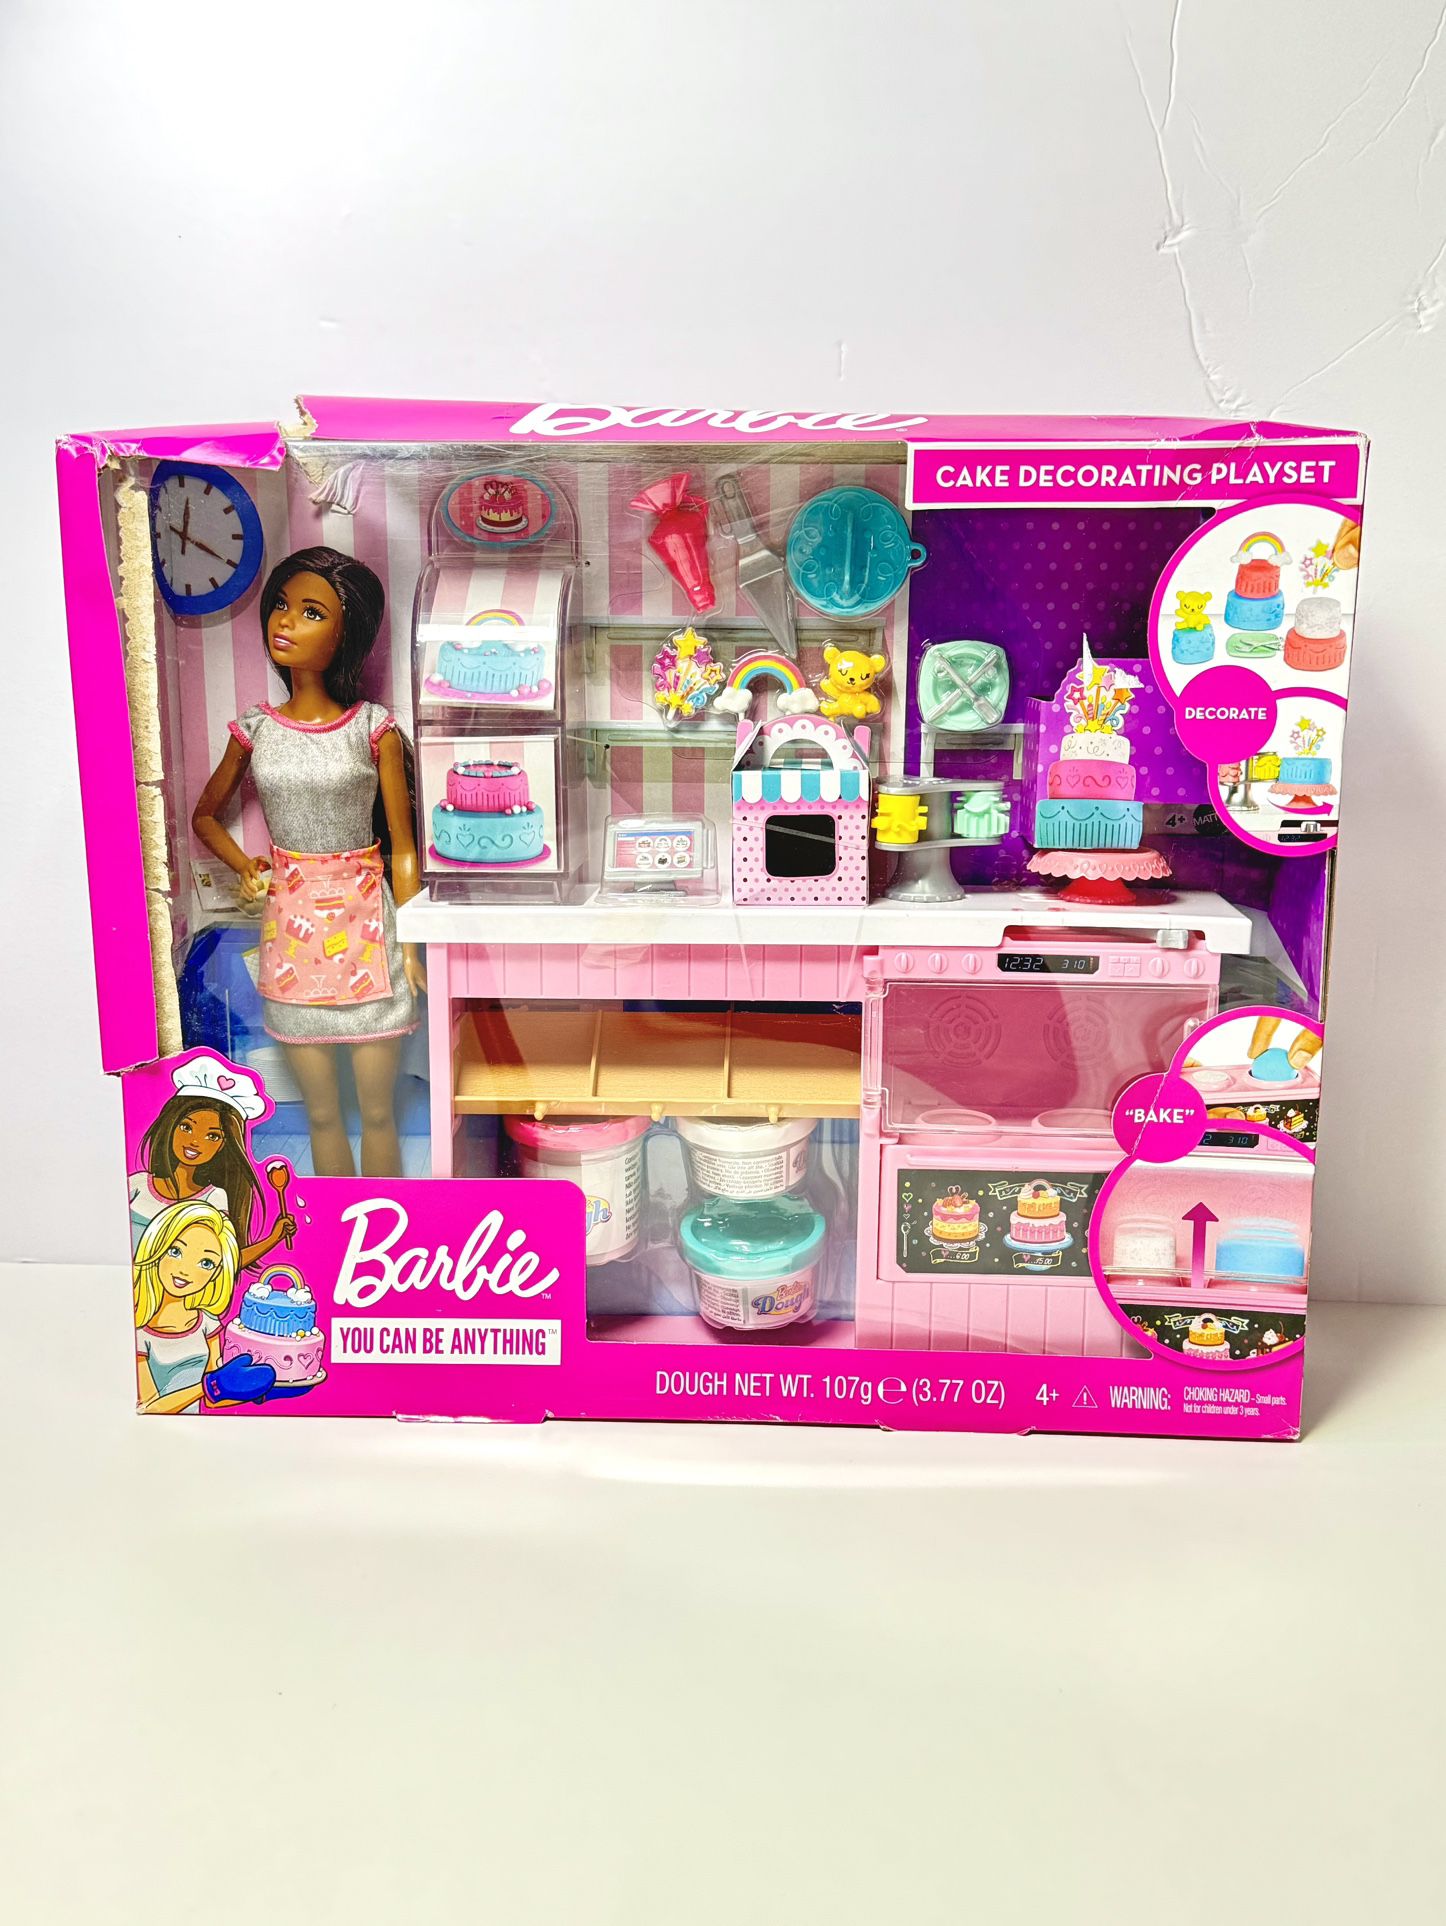 Barbie Cake Decorating Playset with Brunette Doll, Baking Island with Oven